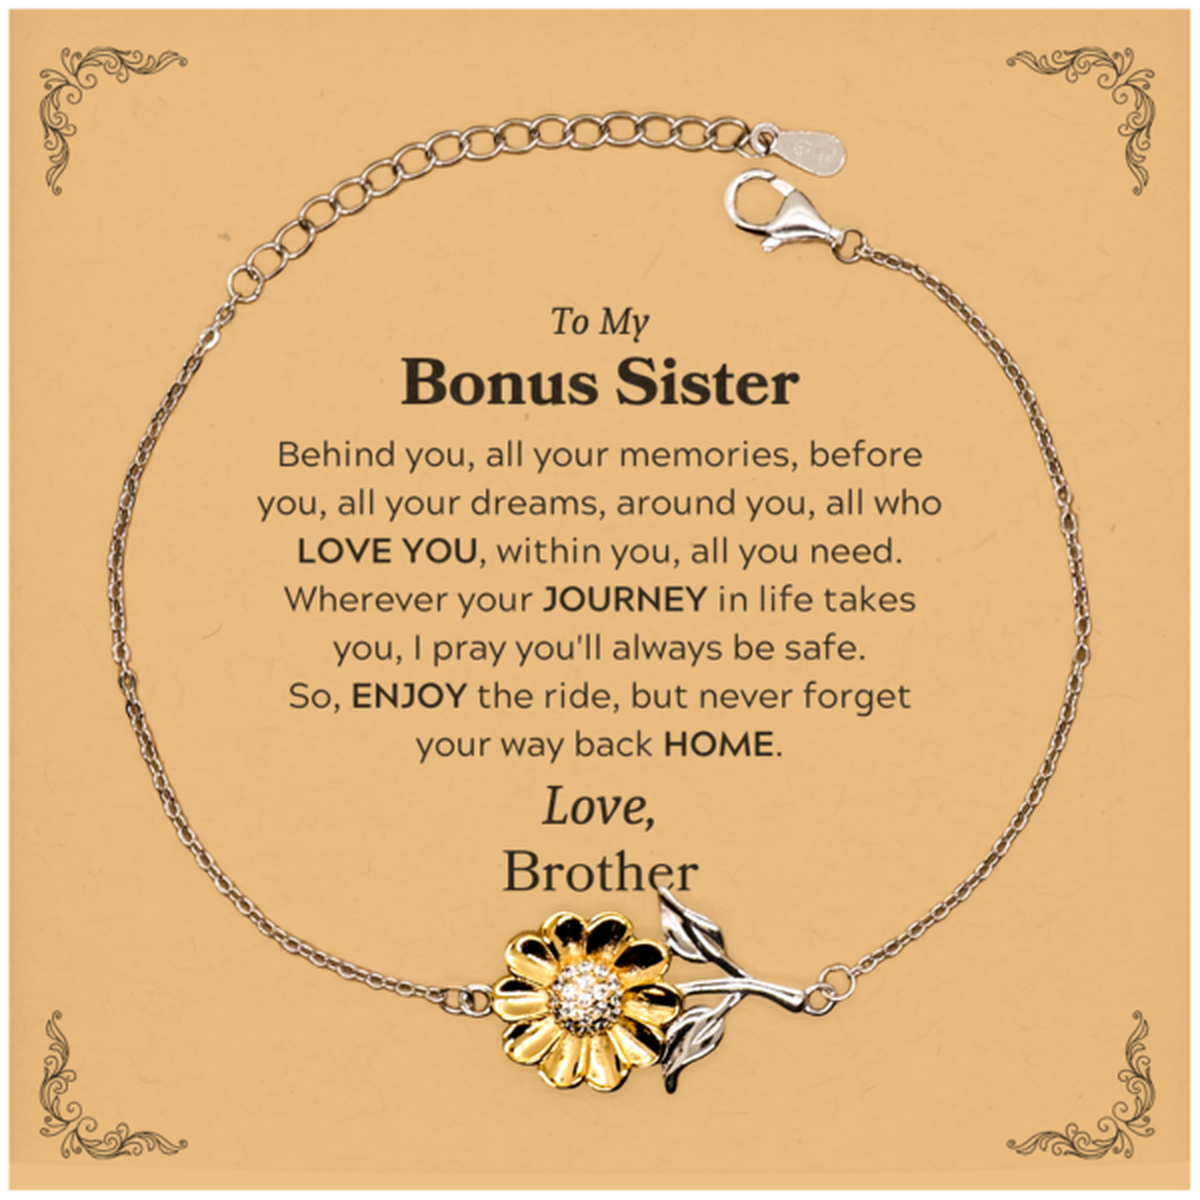 To My Bonus Sister Graduation Gifts from Brother, Bonus Sister Sunflower Bracelet Christmas Birthday Gifts for Bonus Sister Behind you, all your memories, before you, all your dreams. Love, Brother